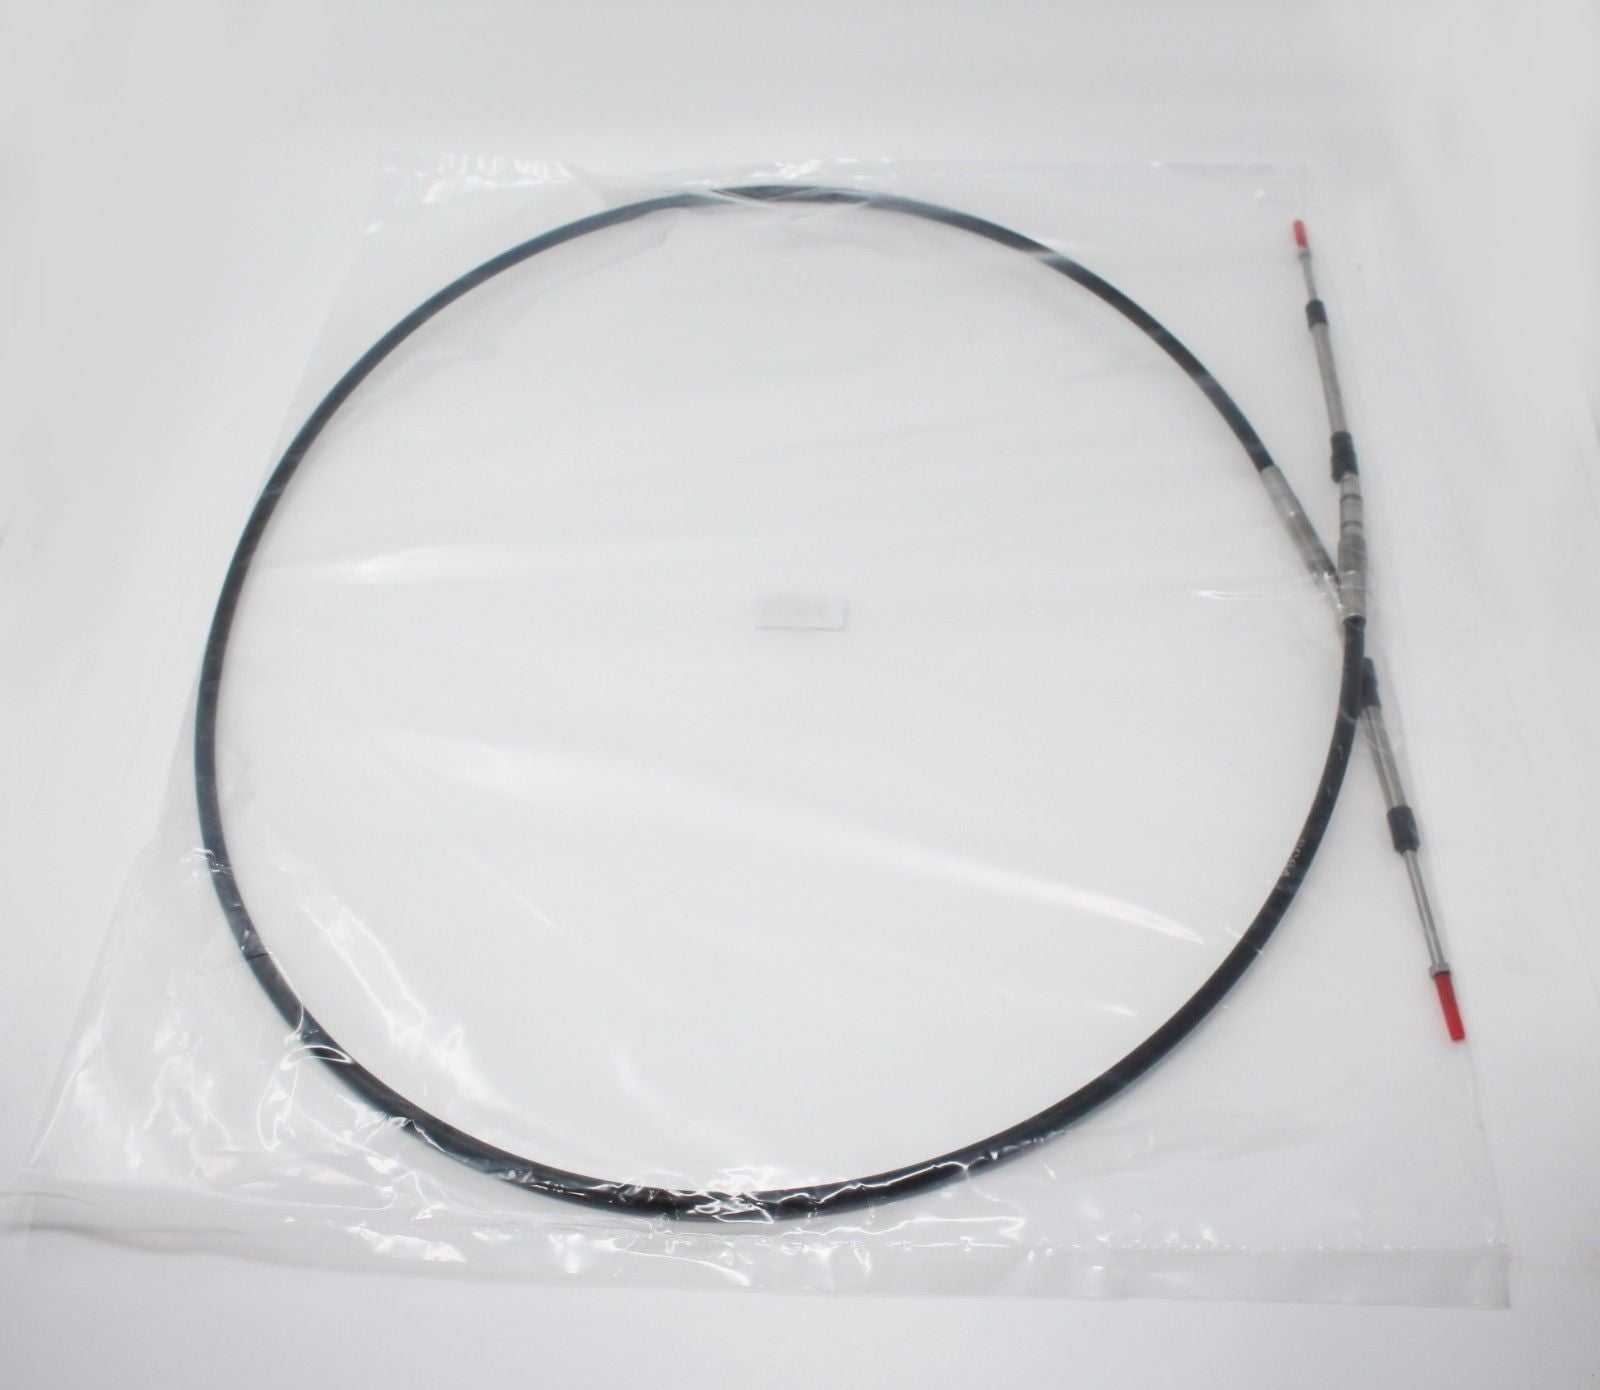 Aftermarket Steering Cable Replacement for Seadoo GTX DI/GTX 4TEC 